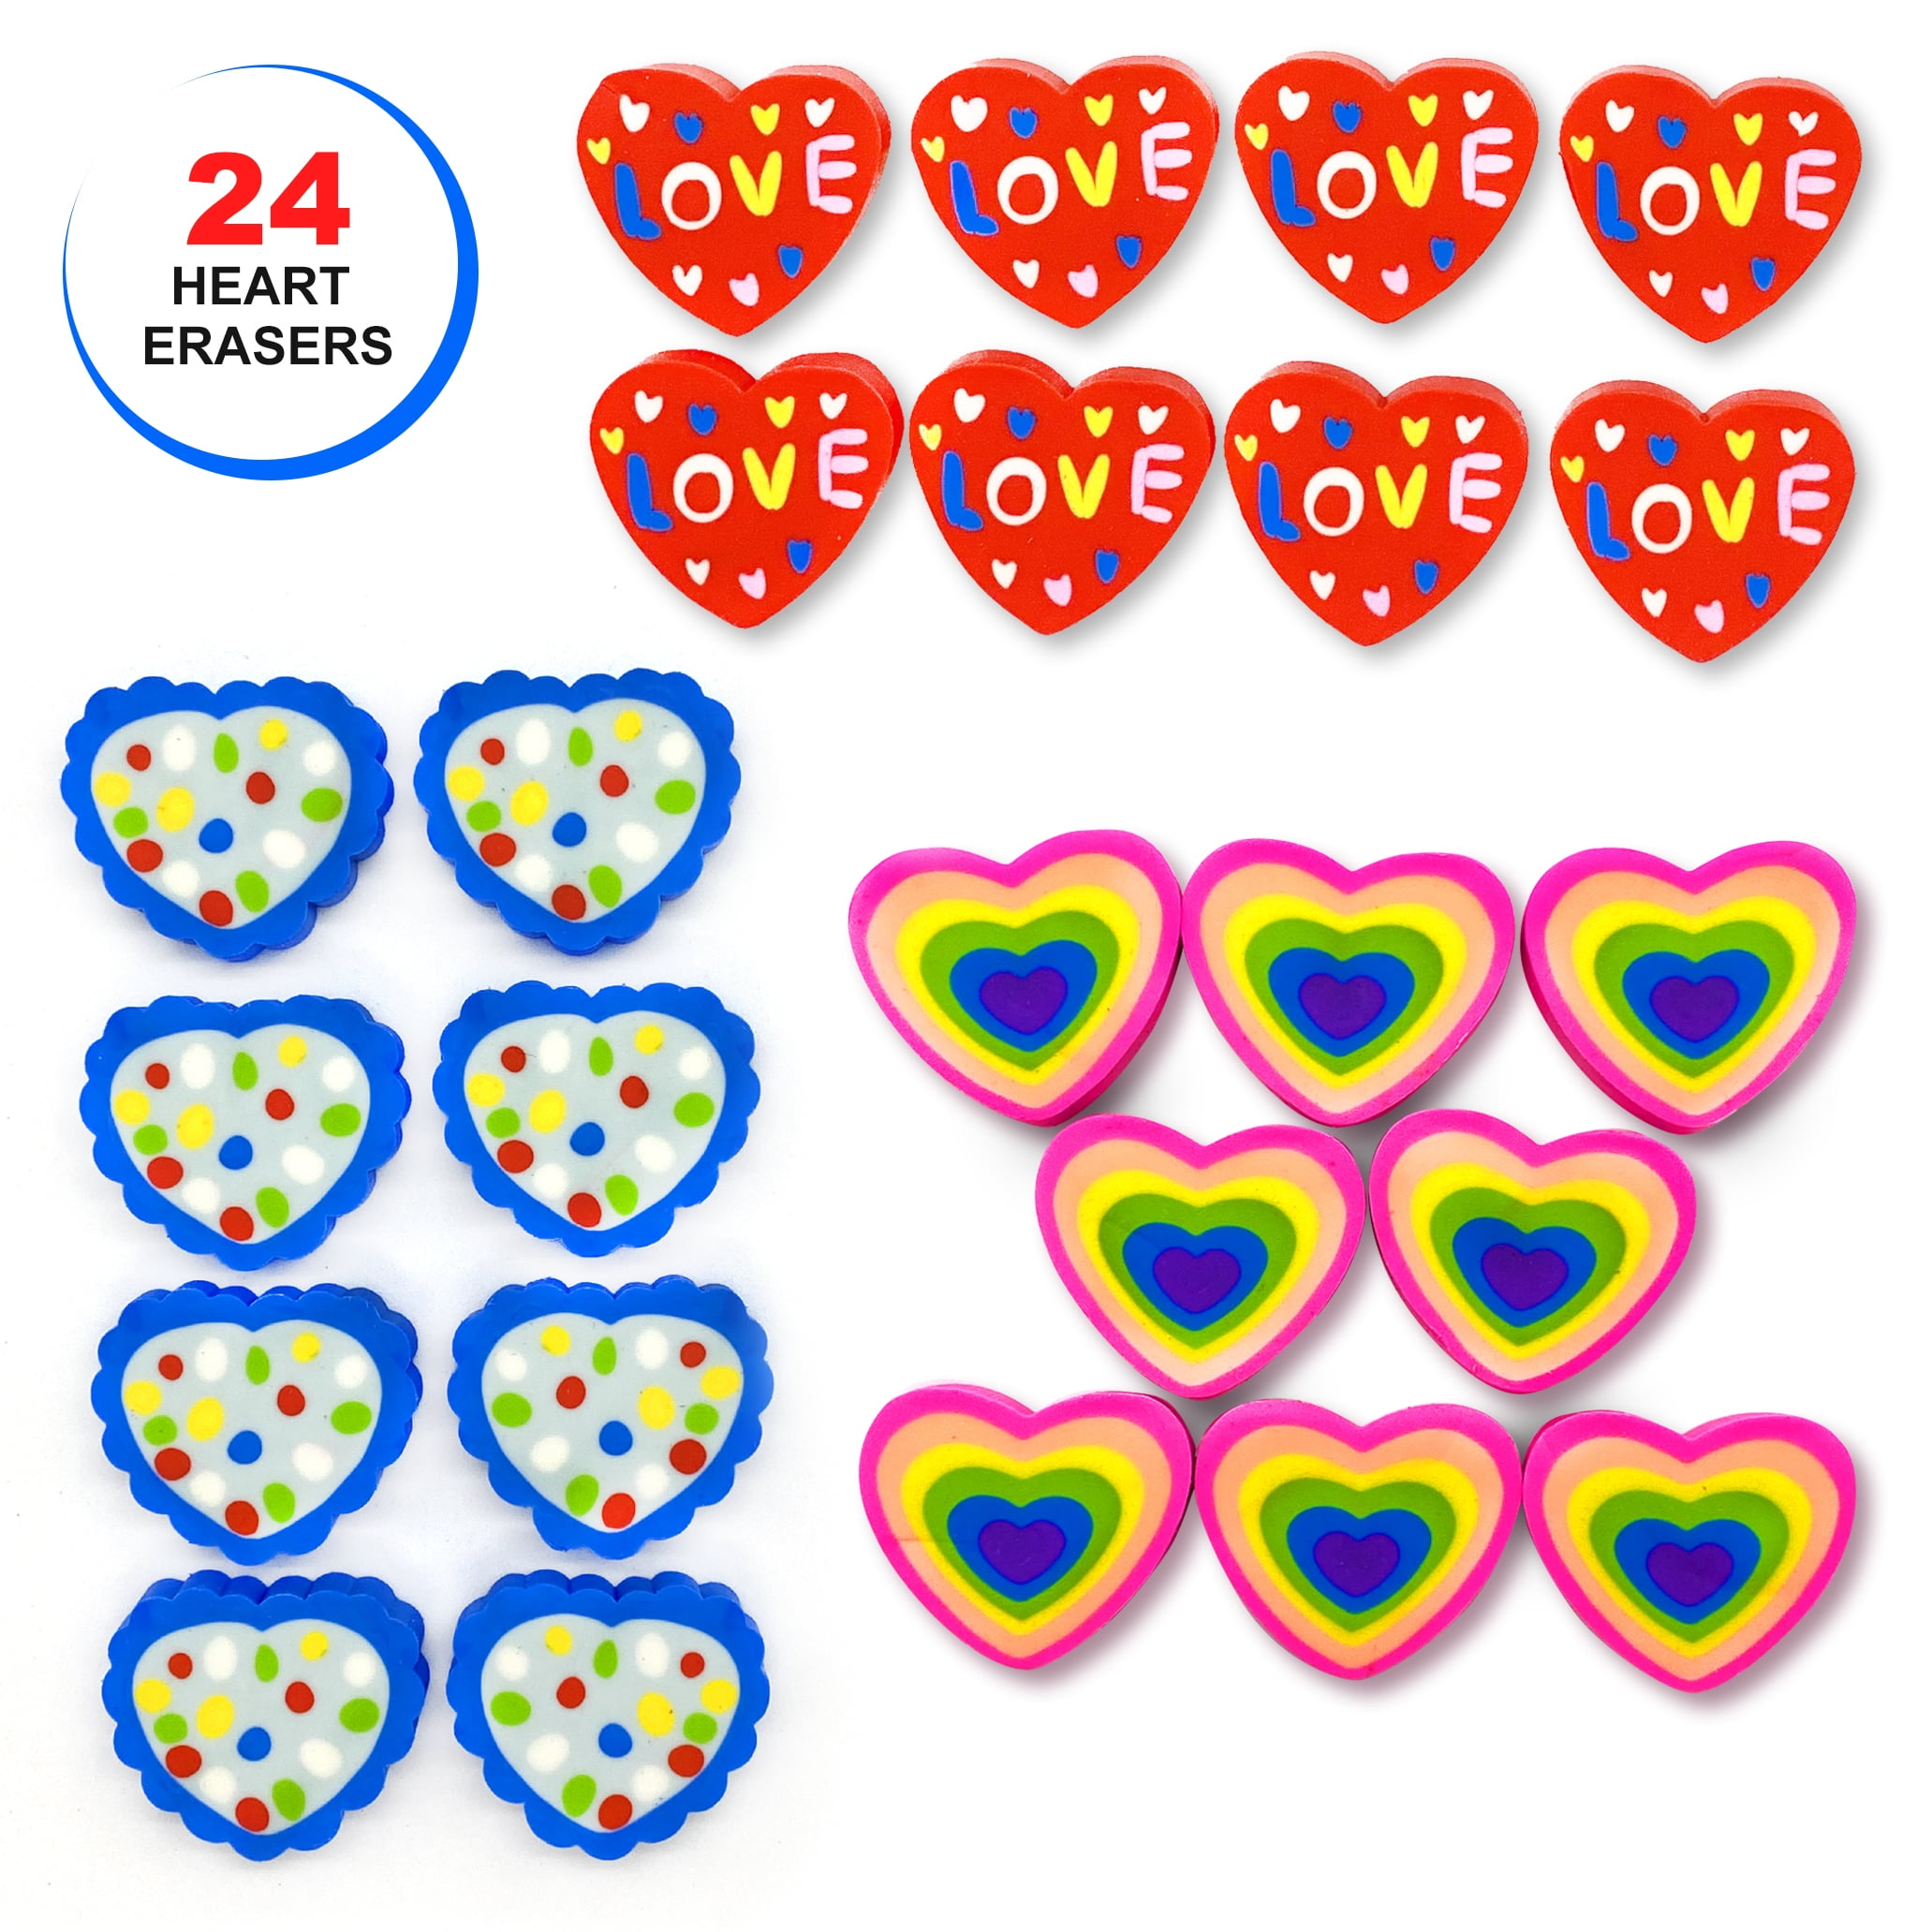  ECOHDT 24 Packs Valentines Day Gifts for Kids,192 Pcs Kids  Valentines Day Gifts for School,Stationary Set with Scratch  Drawings,Greeting Card etc,Party Favors for Kids Exchange : Toys & Games